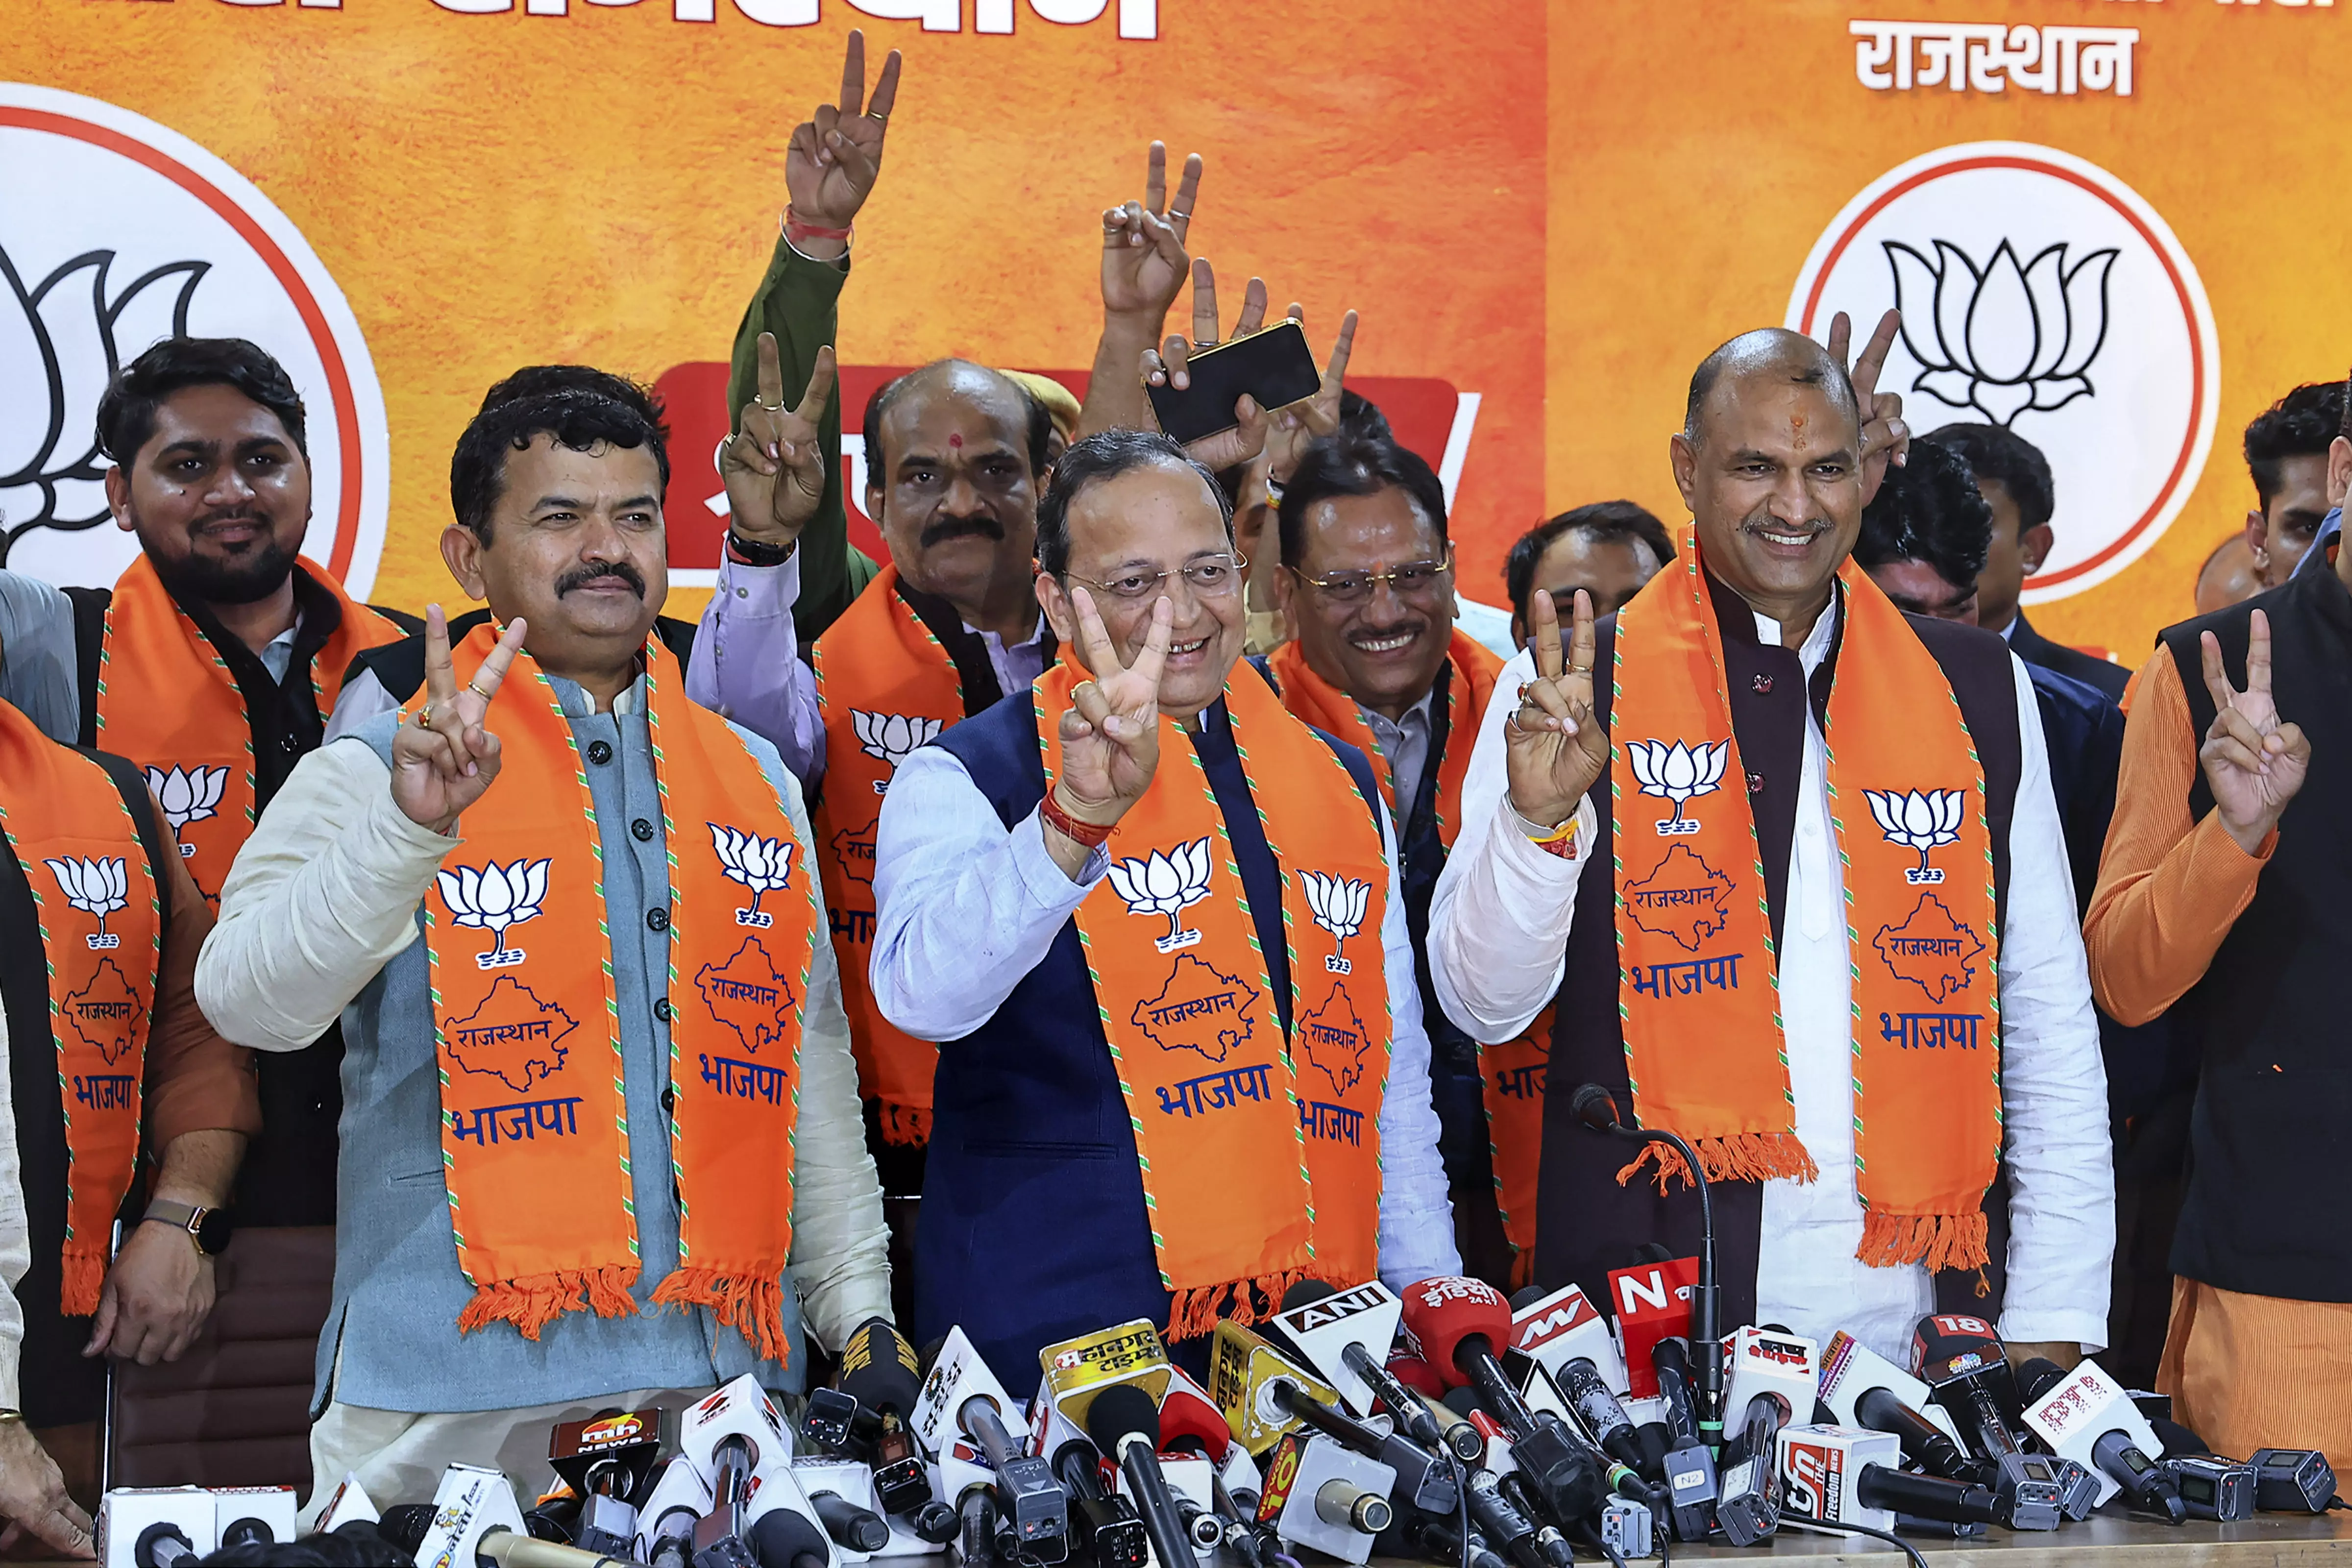 From 1 to 13 seats: What explains BJP’s rise in 5 eastern Rajasthan districts?